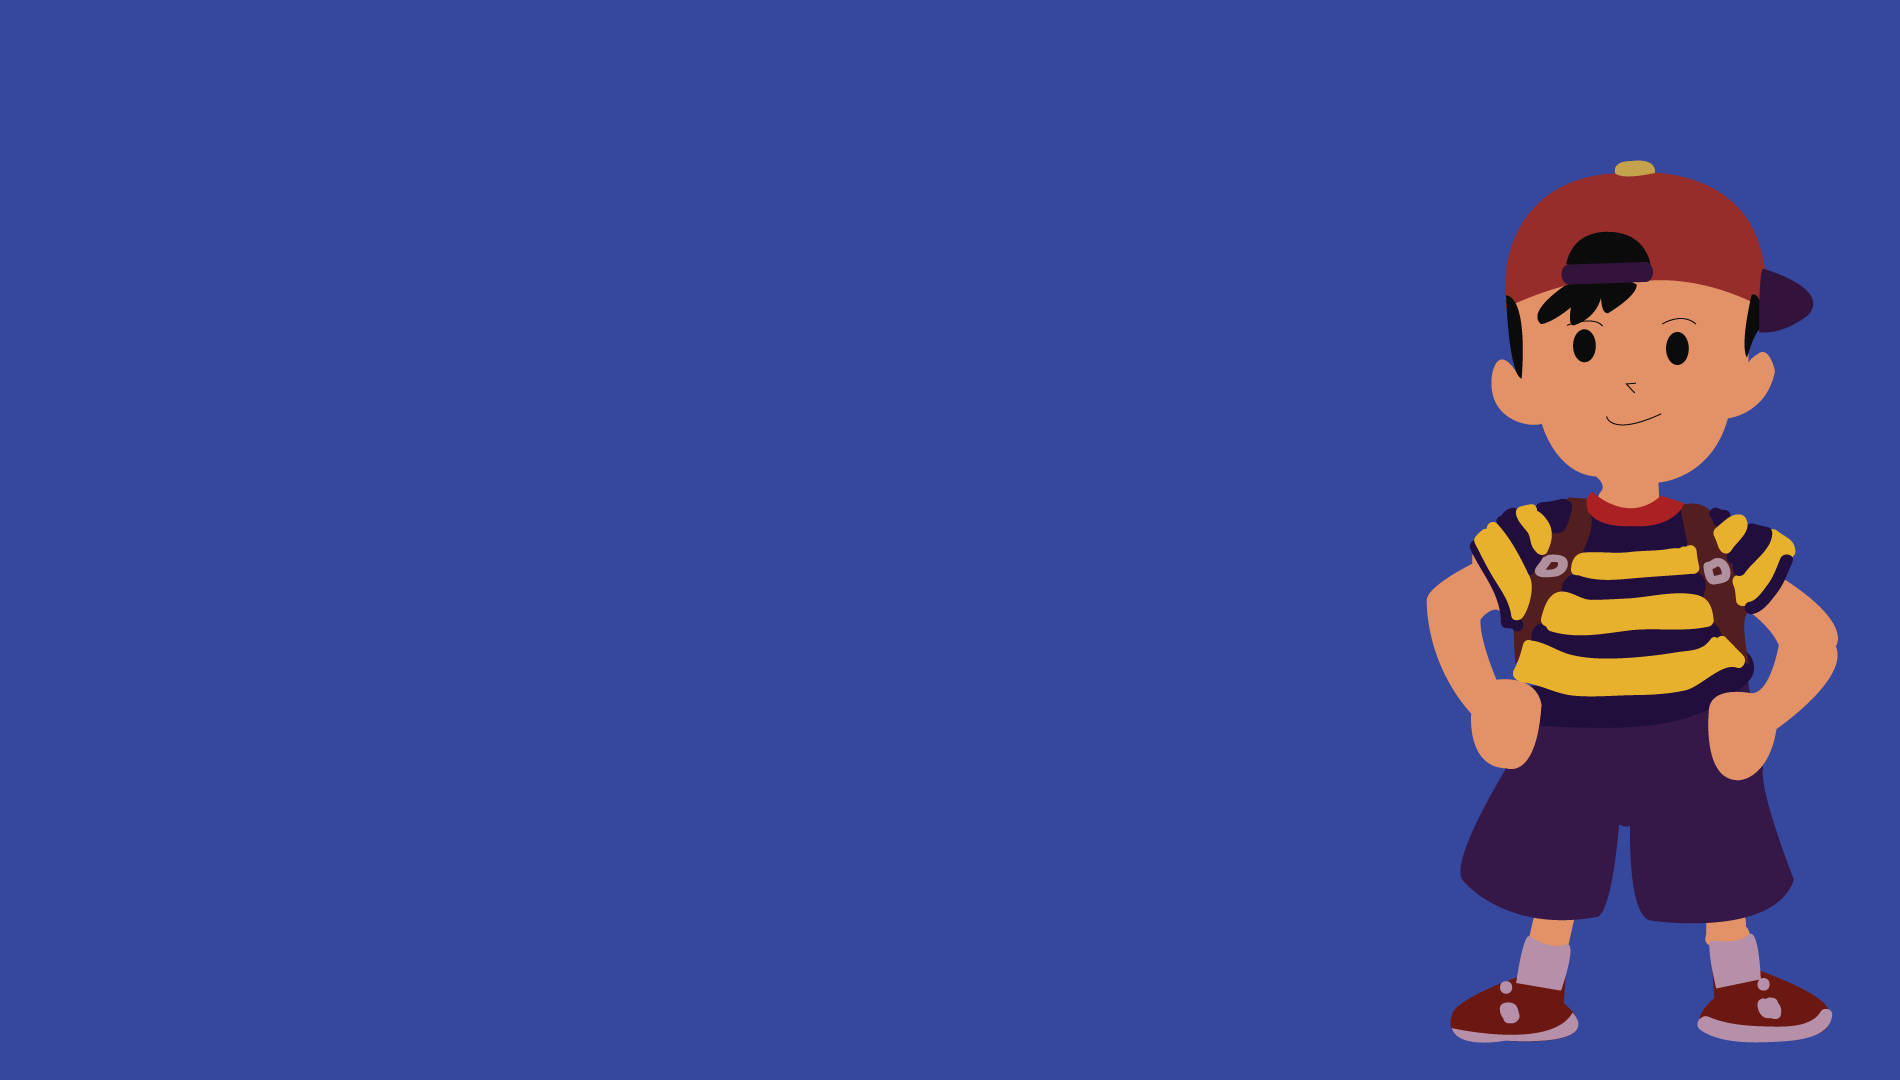 Minimalist Ness Of Earthbound In Blue Wallpaper